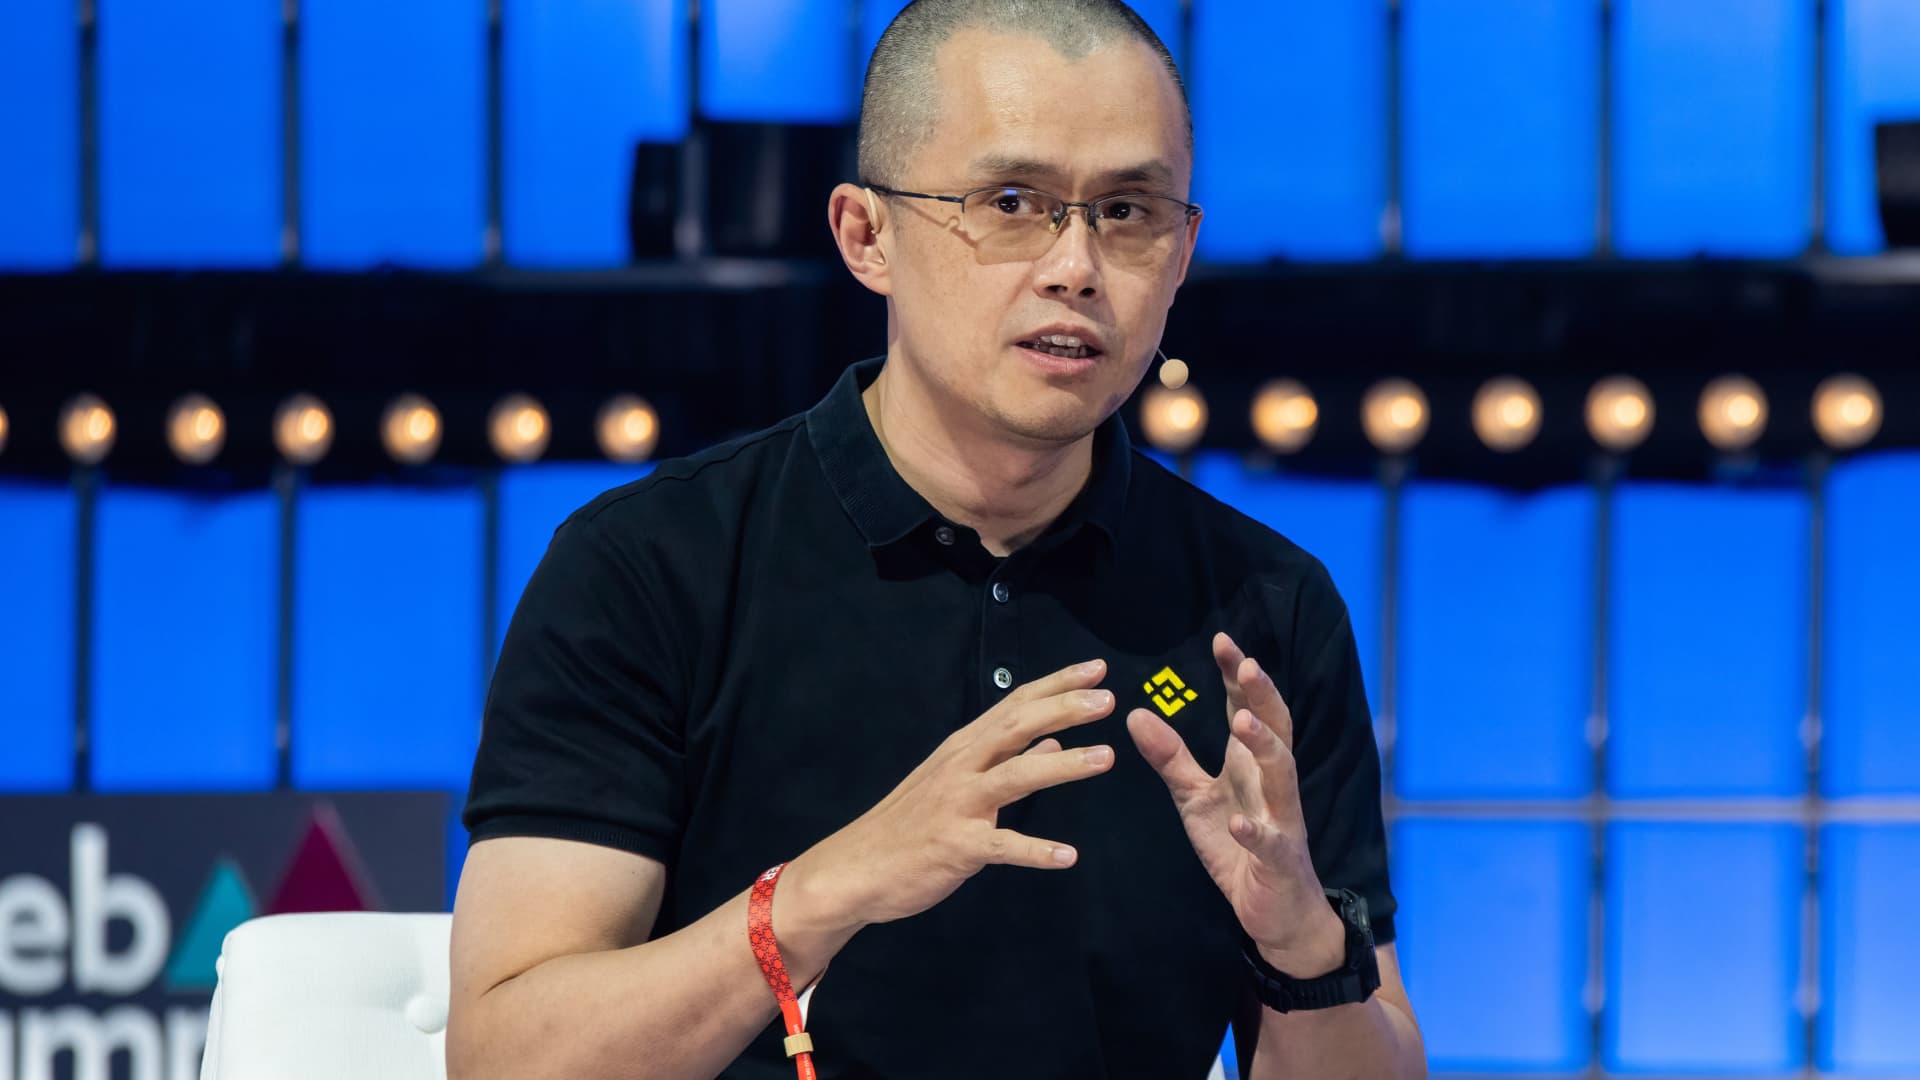 Binance backs out of FTX rescue, leaving company on brink of collapse